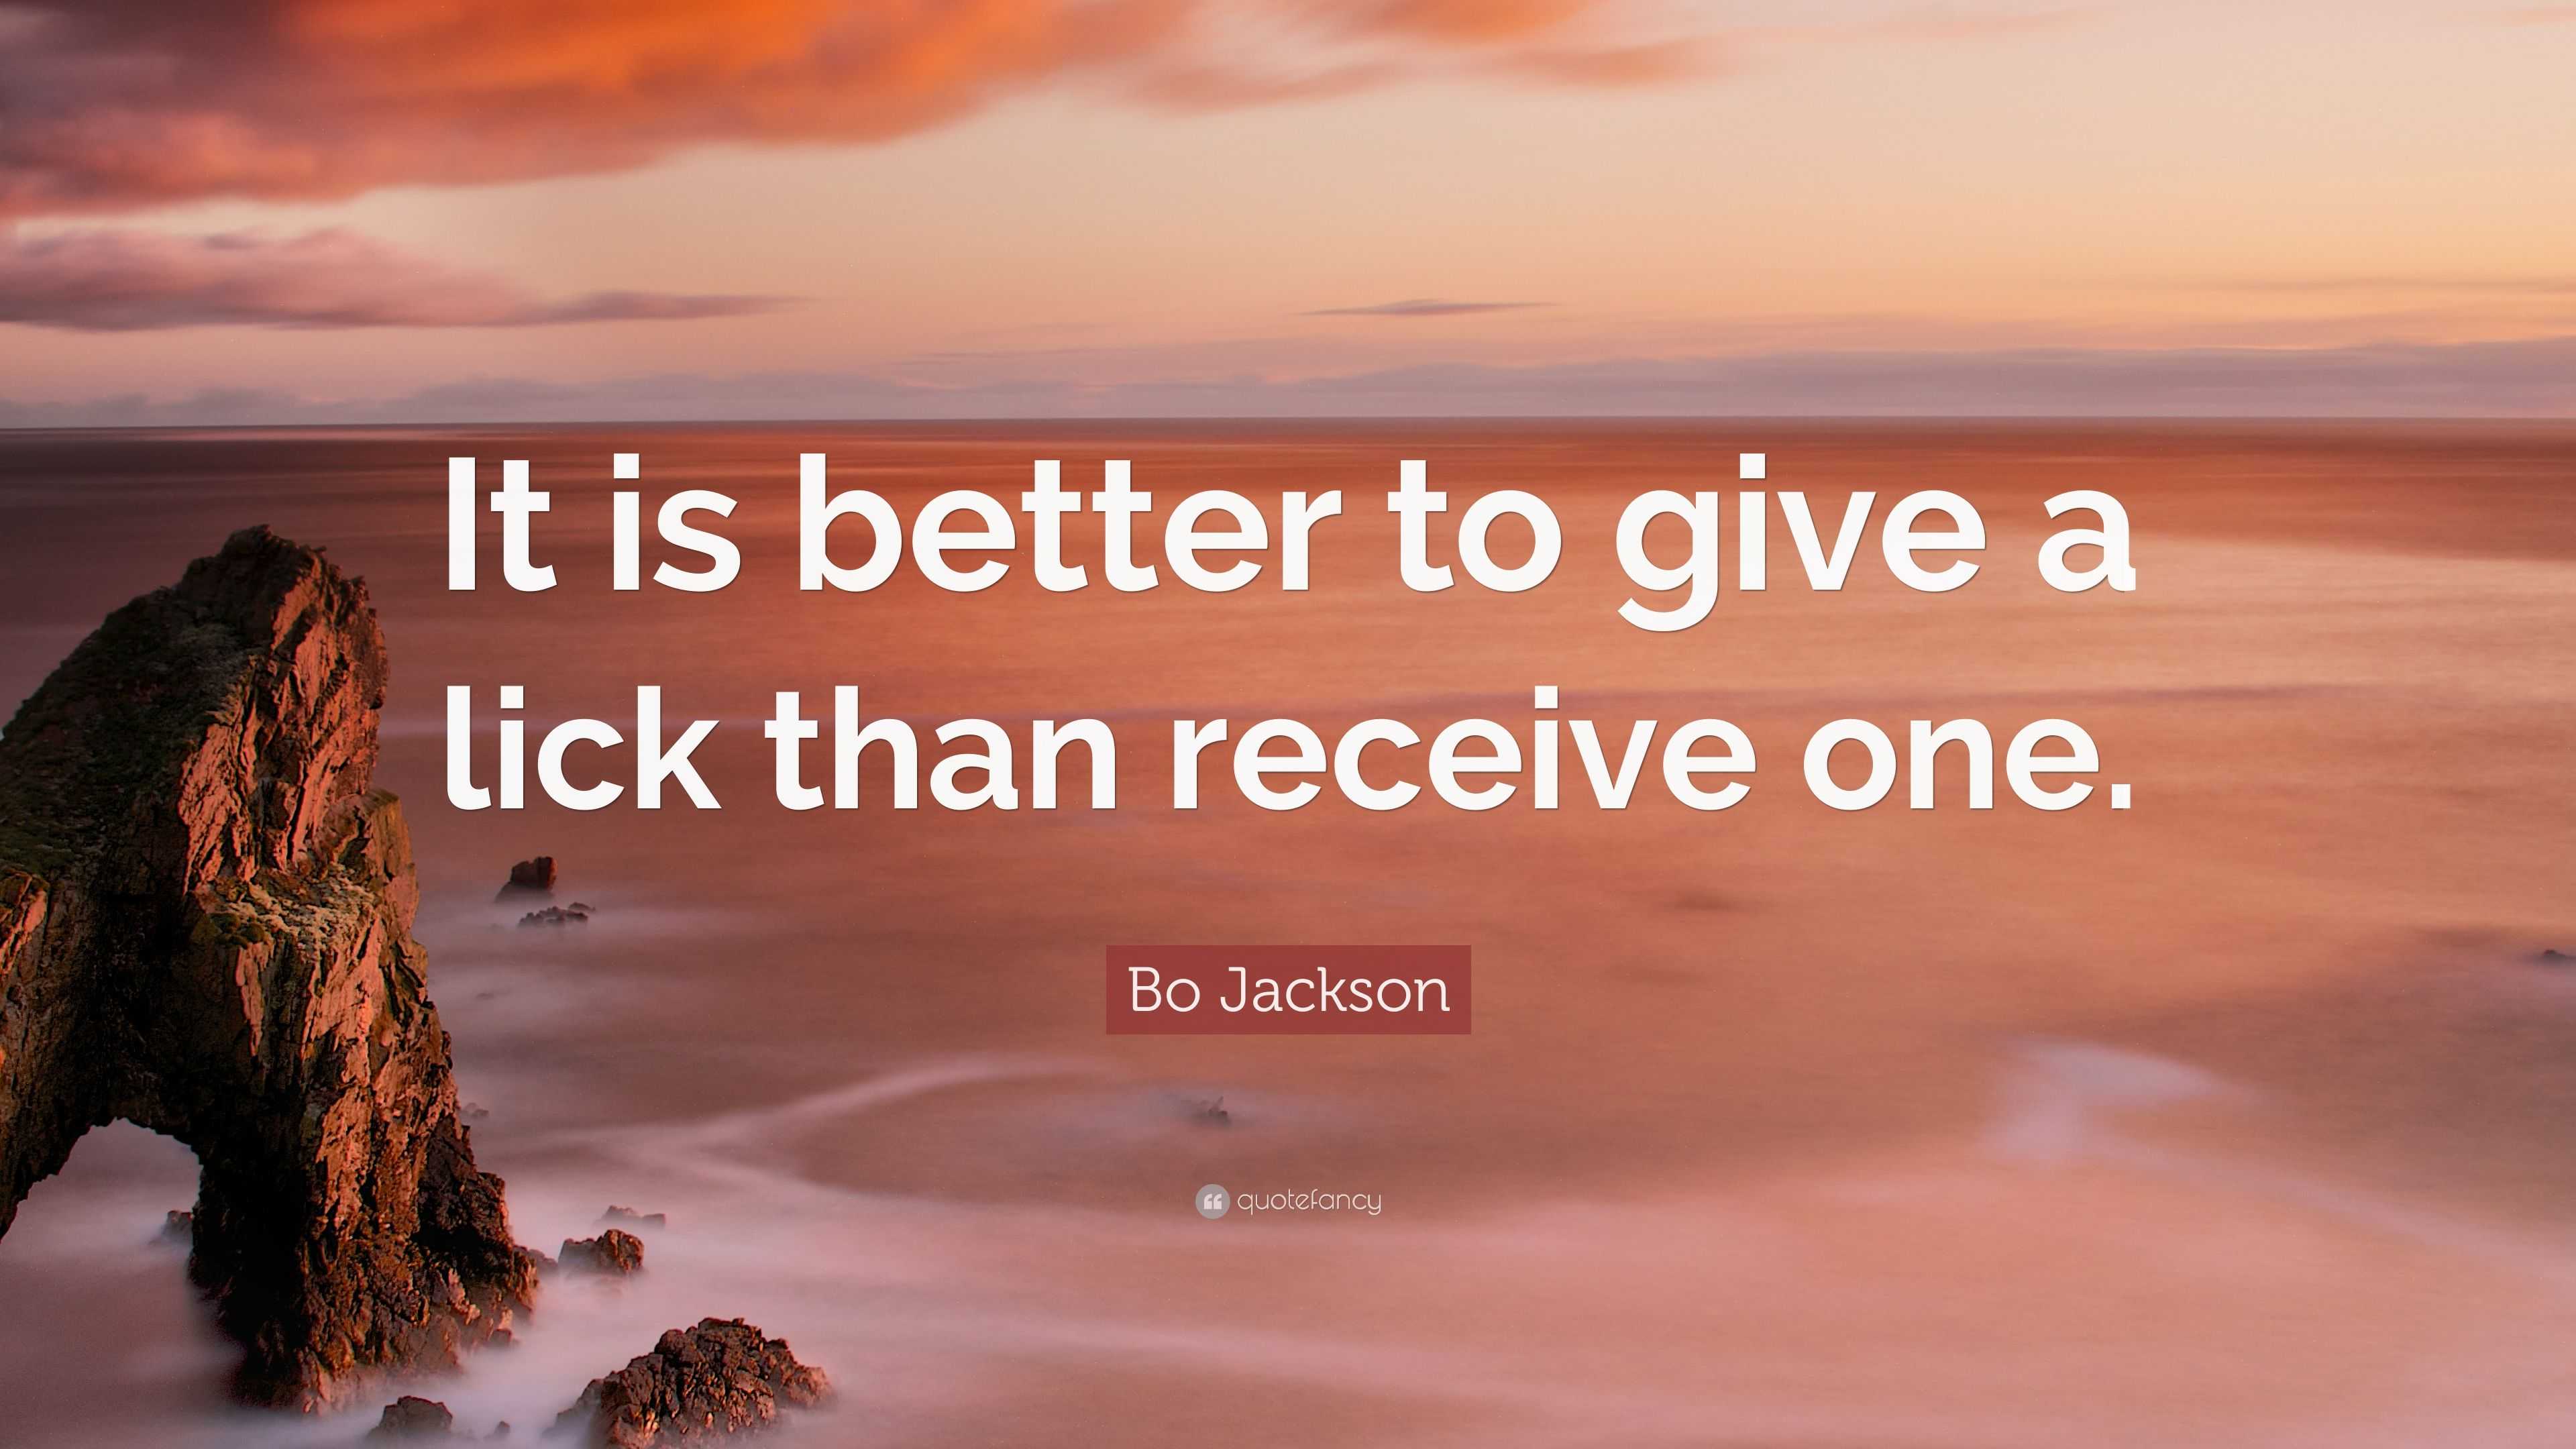 Bo Jackson Quote: “It is better to give a lick than receive one.”